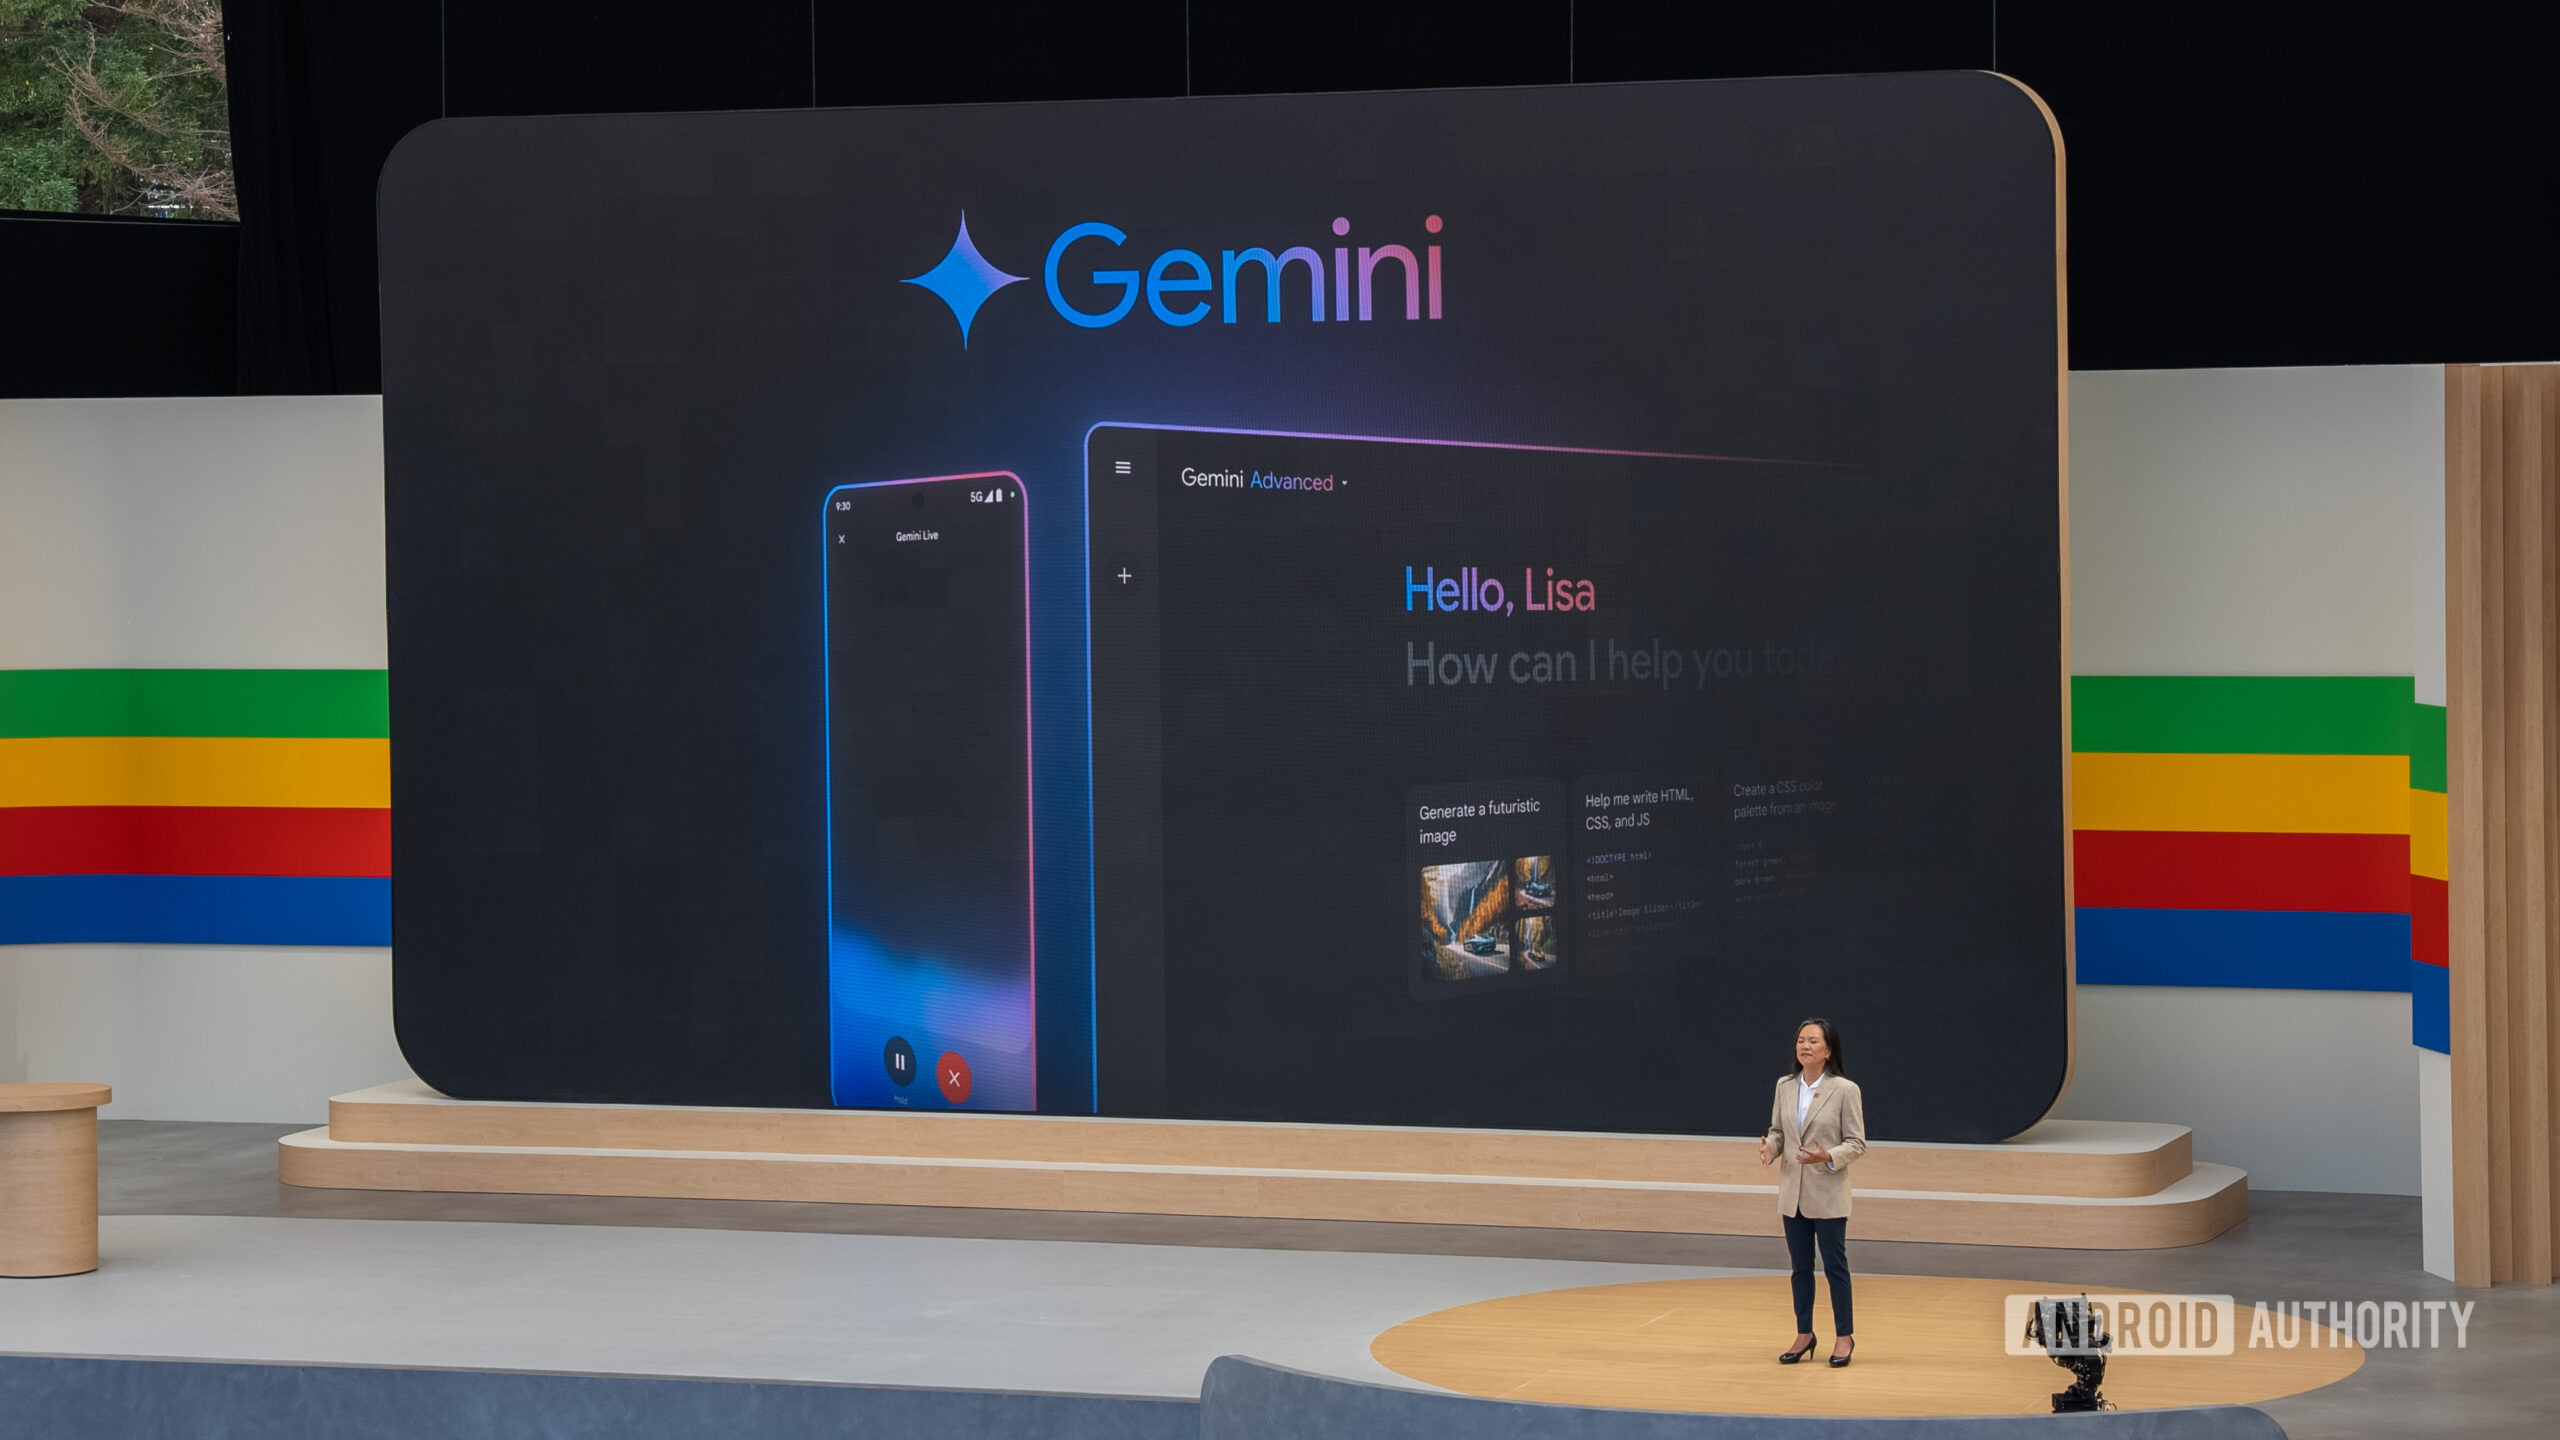 How many times did Google say ‘Gemini’ or ‘Android’ at I/O?